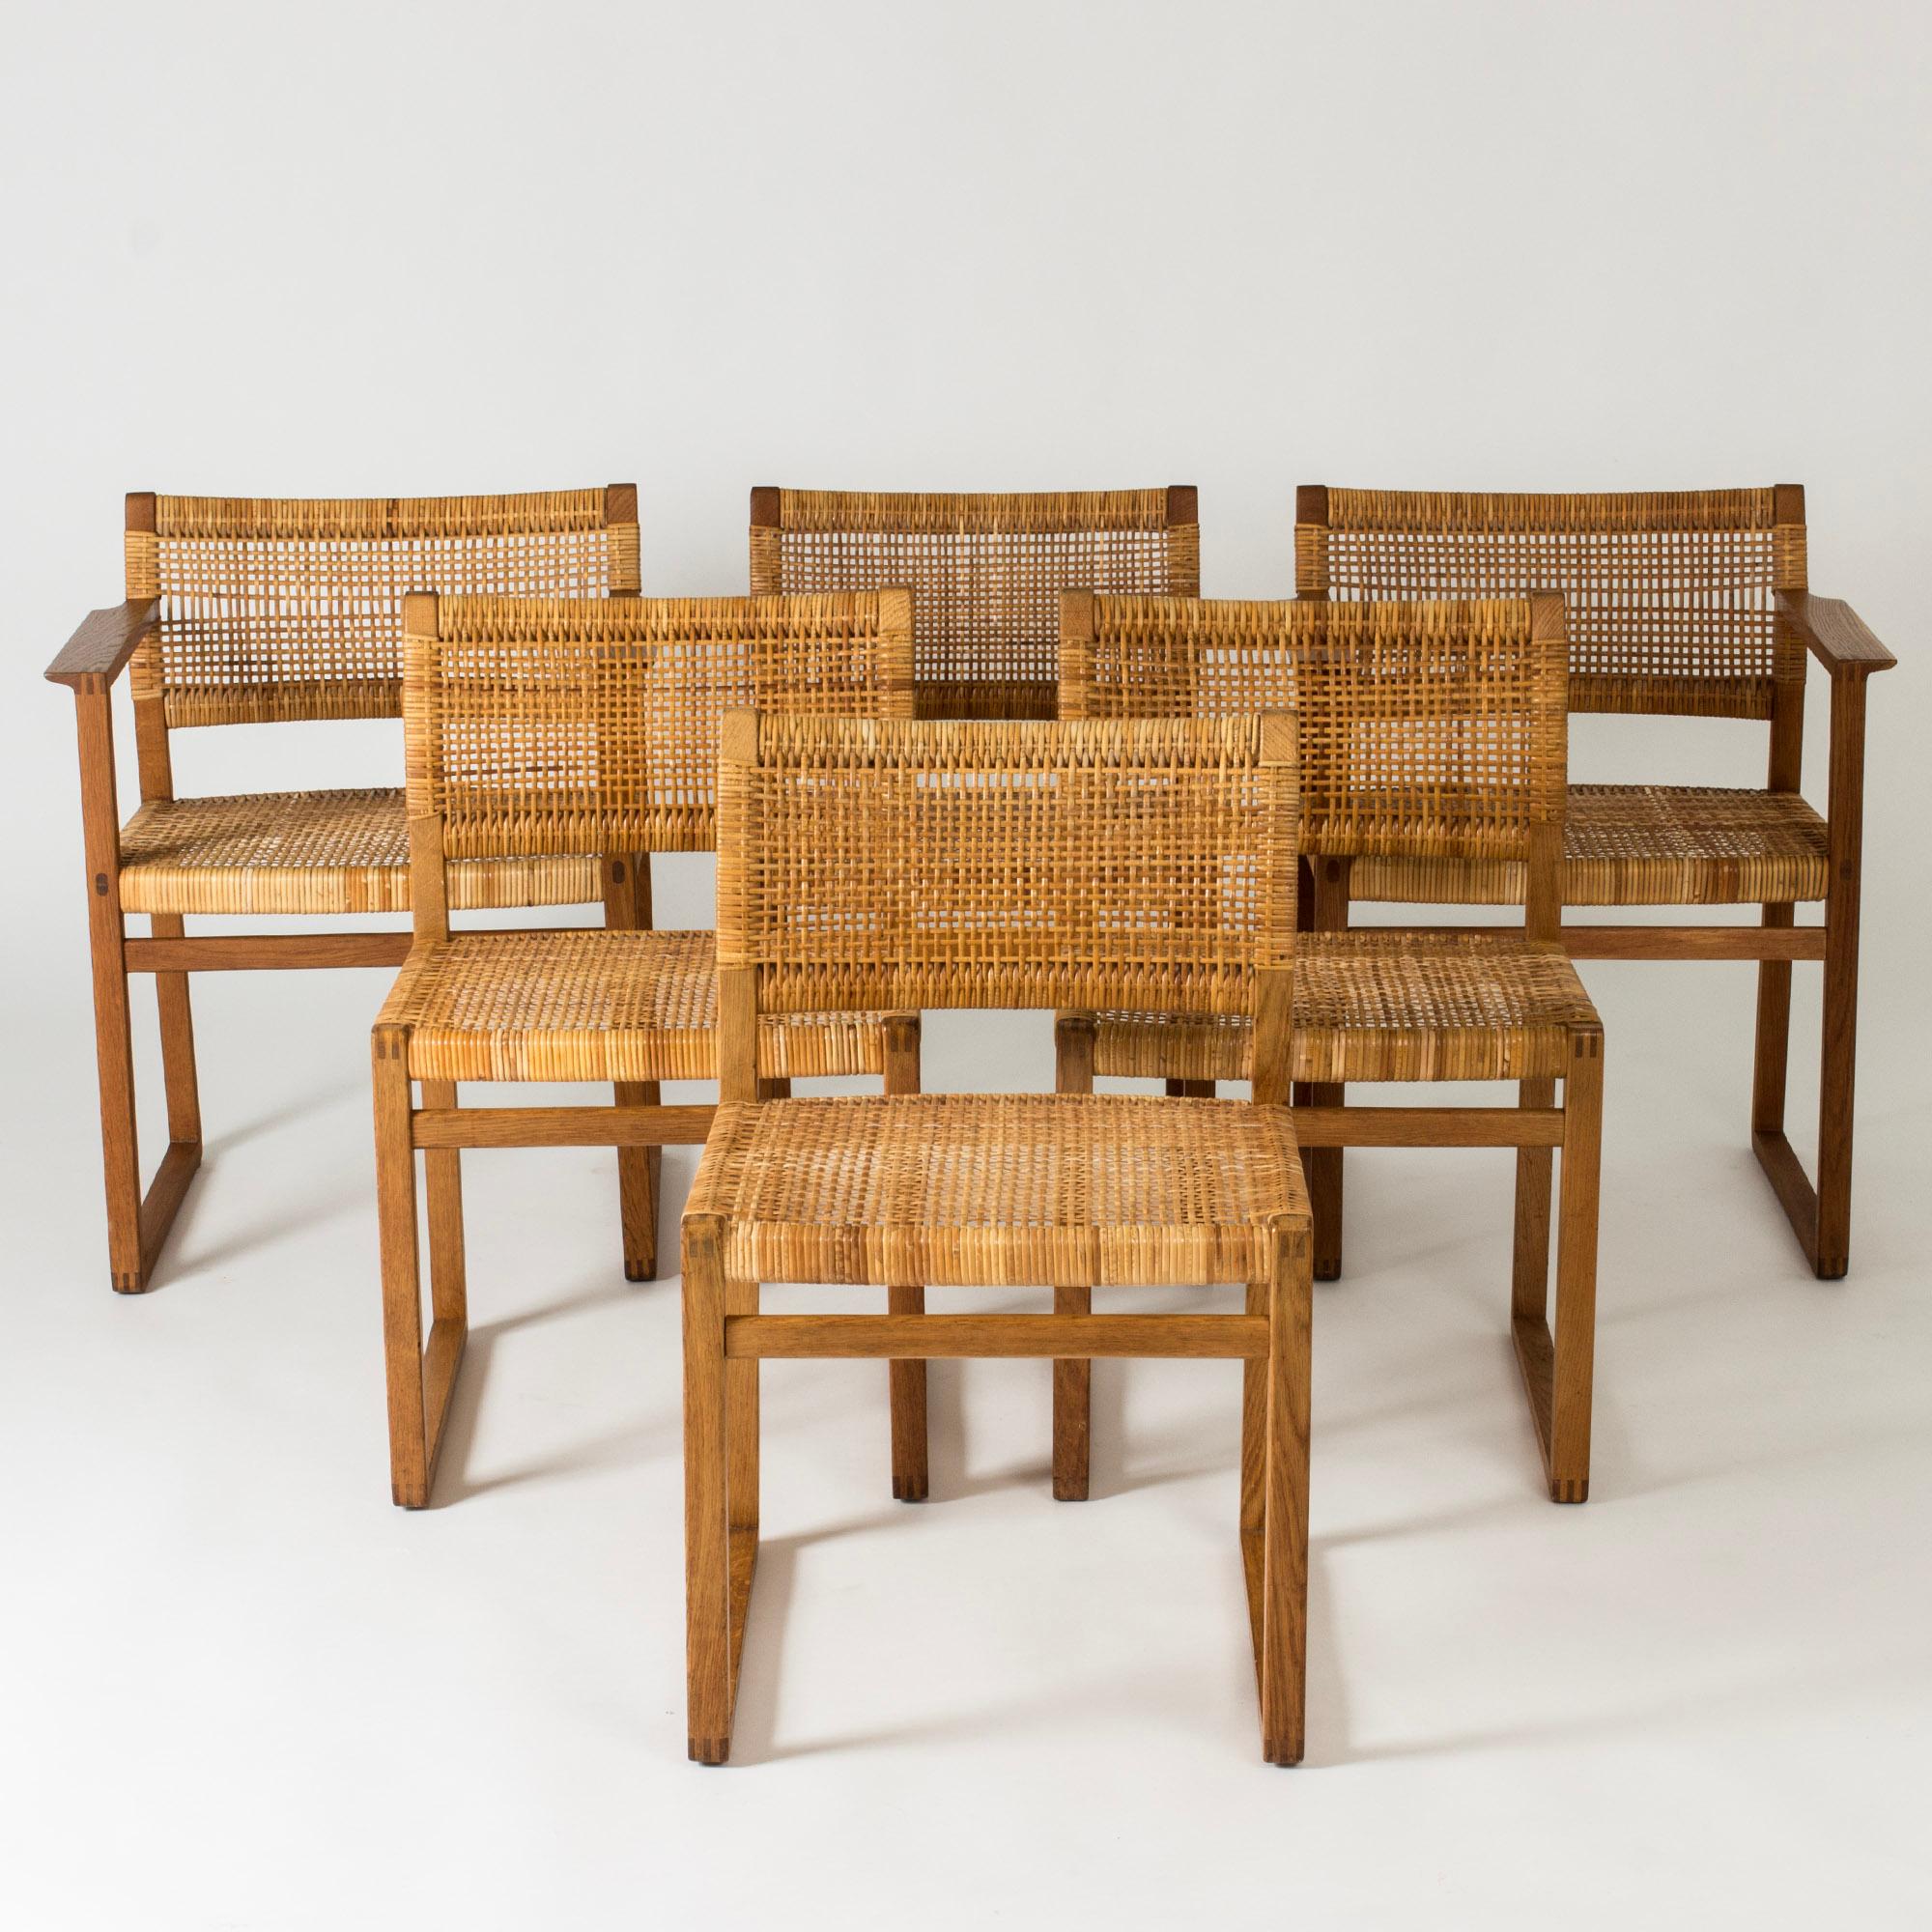 Set of six amazing oak and rattan dining chairs by Børge Mogensen. Beautiful silhouettes and materials. Two of the chairs have armrests.

Height 75 cm, Width 47.5 / 60 cm, Depth 48 / 49 cm